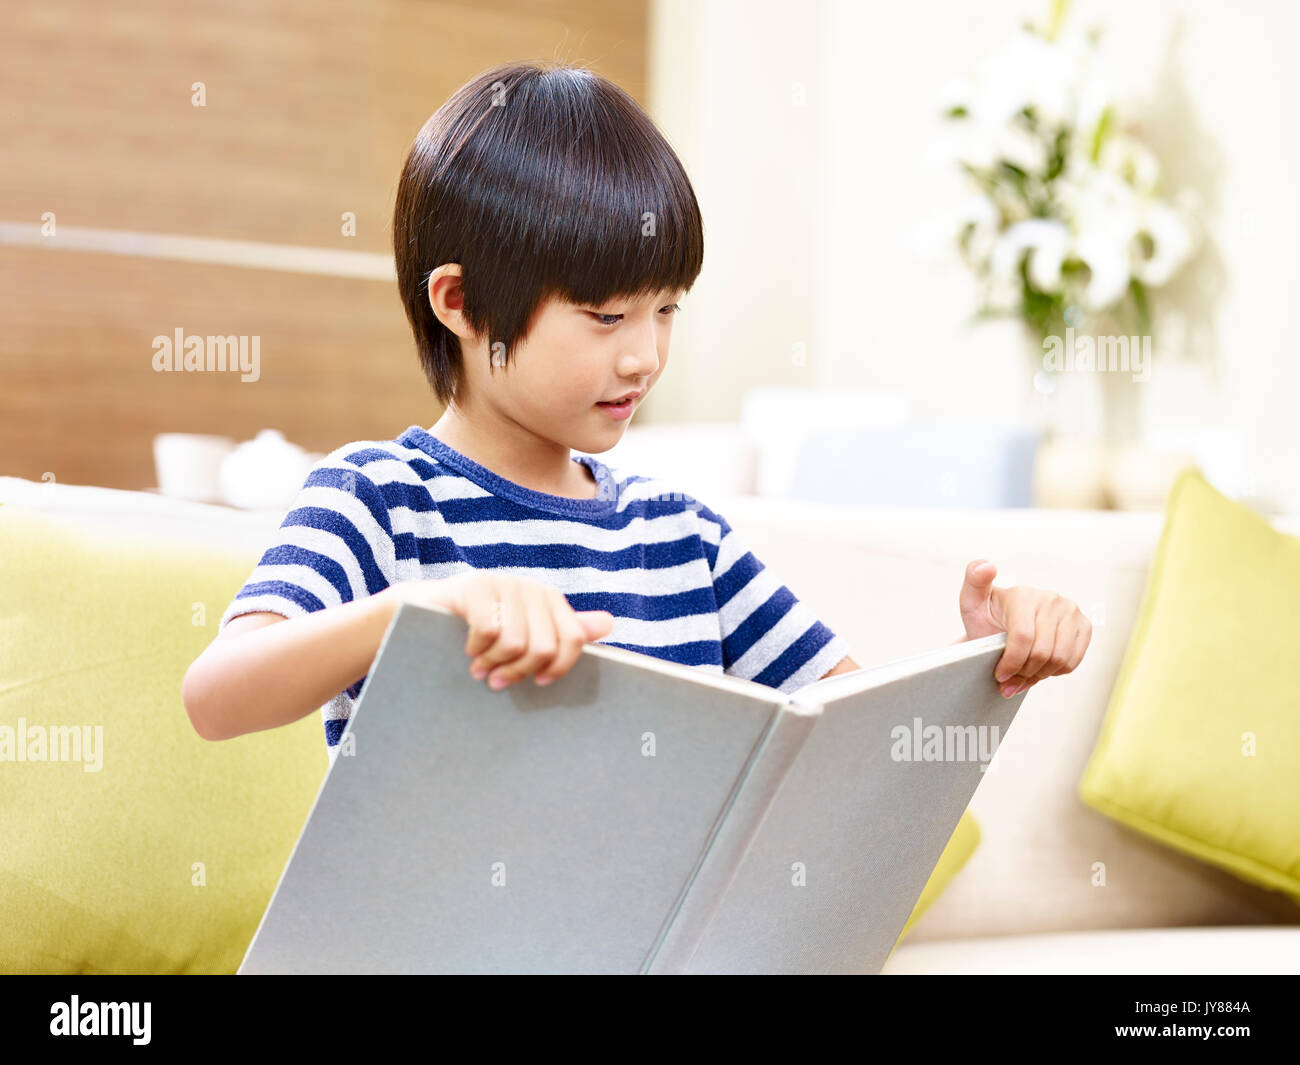 Asian boy sitting on couch reading a book. Banque D'Images